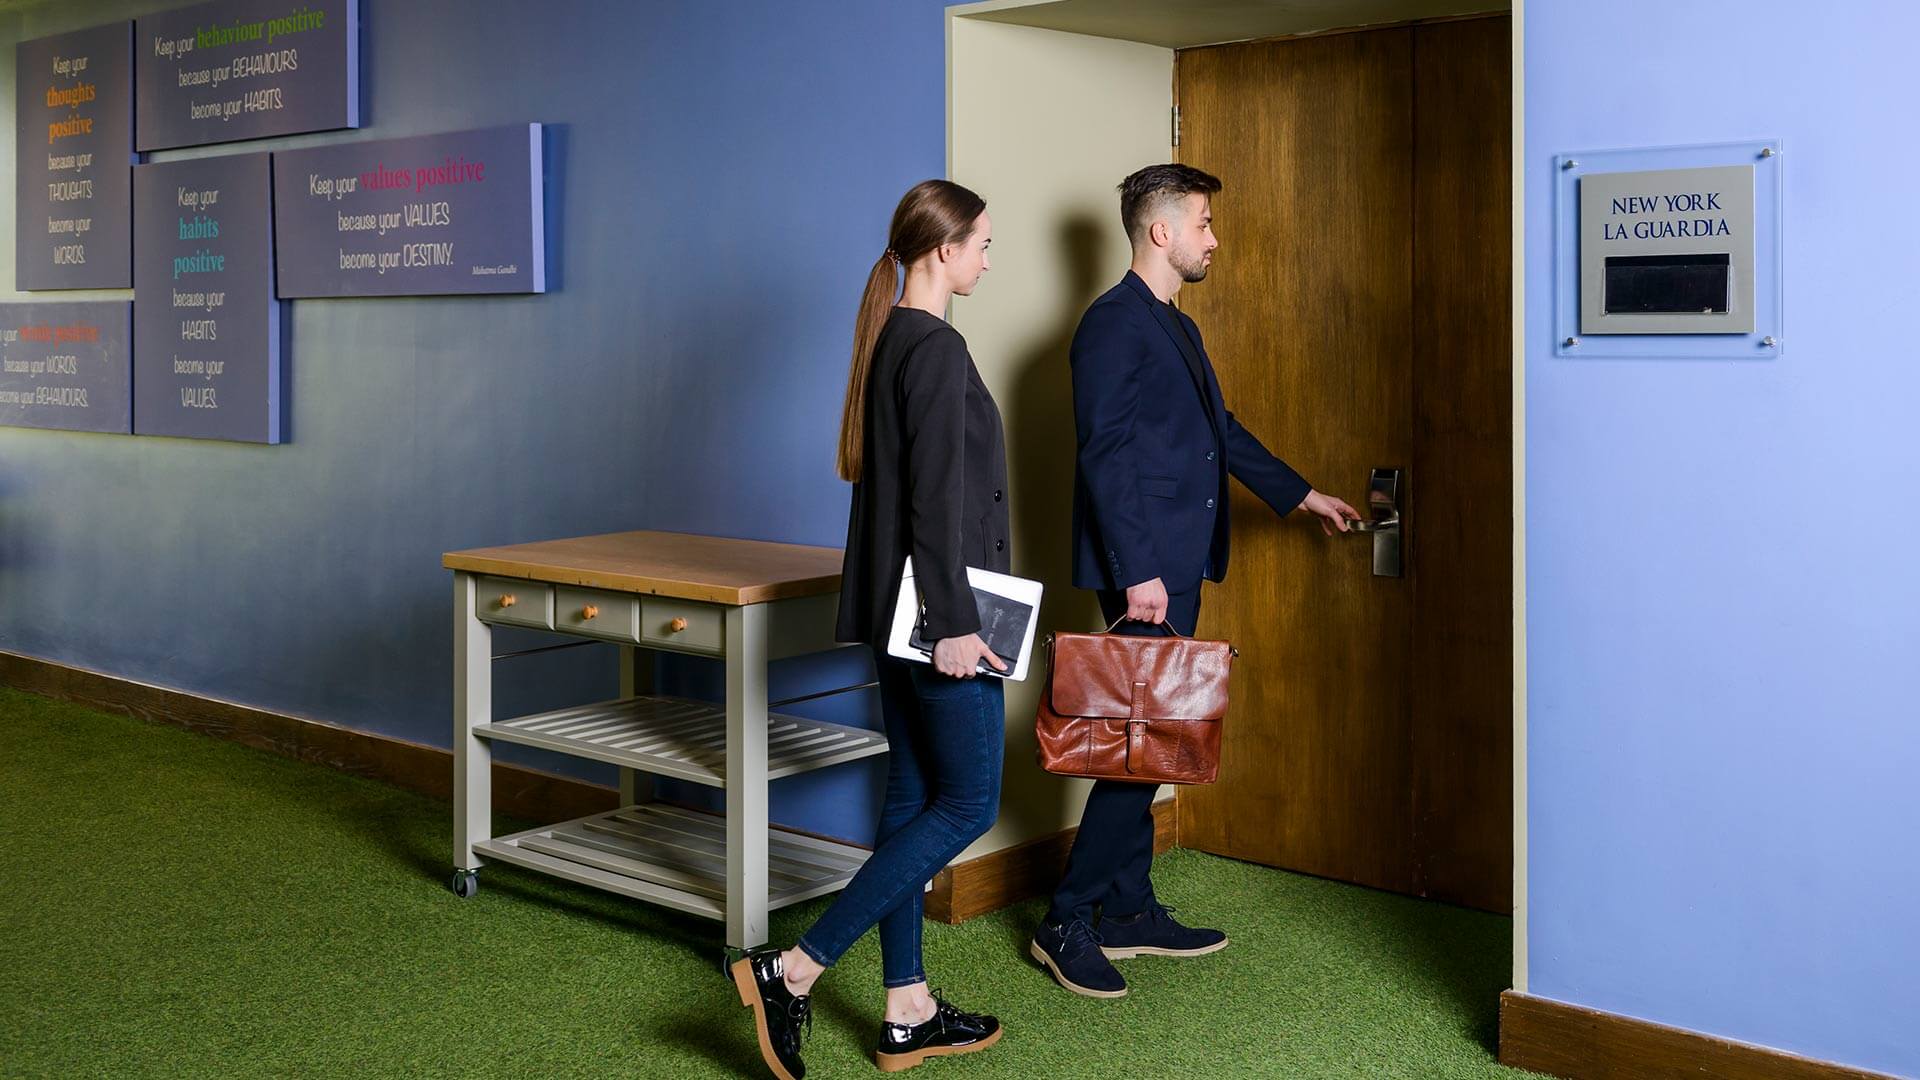 man and woman entering a meeting room